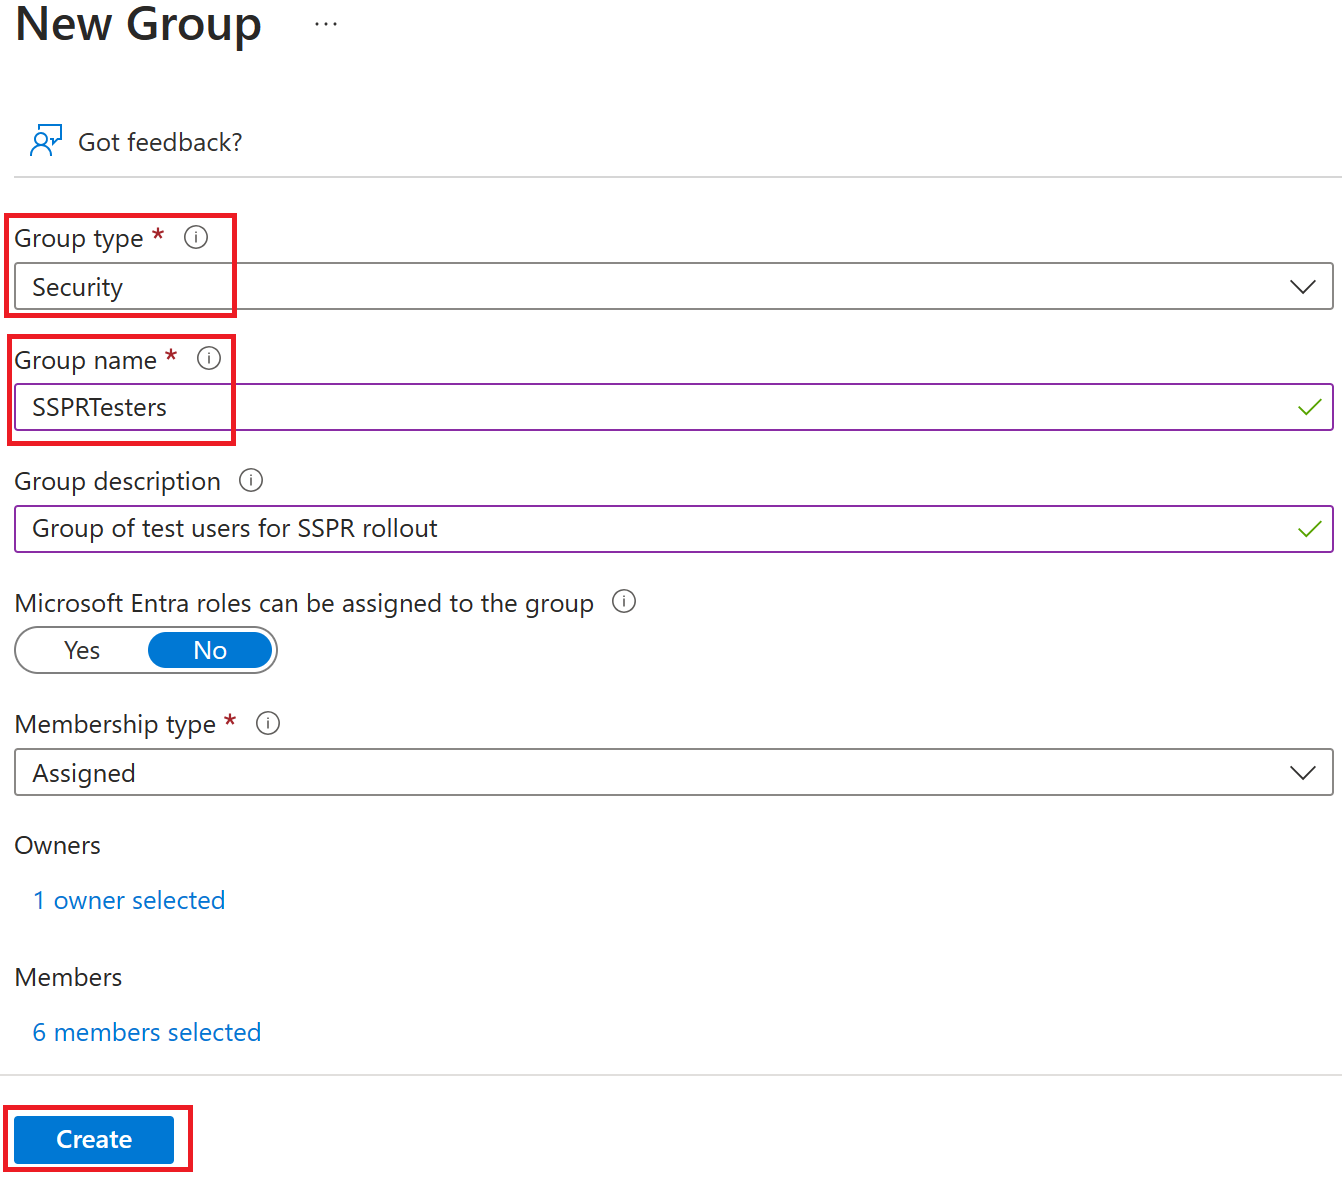 Screenshot of the New Group screen with group type, group name, and create highlighted.